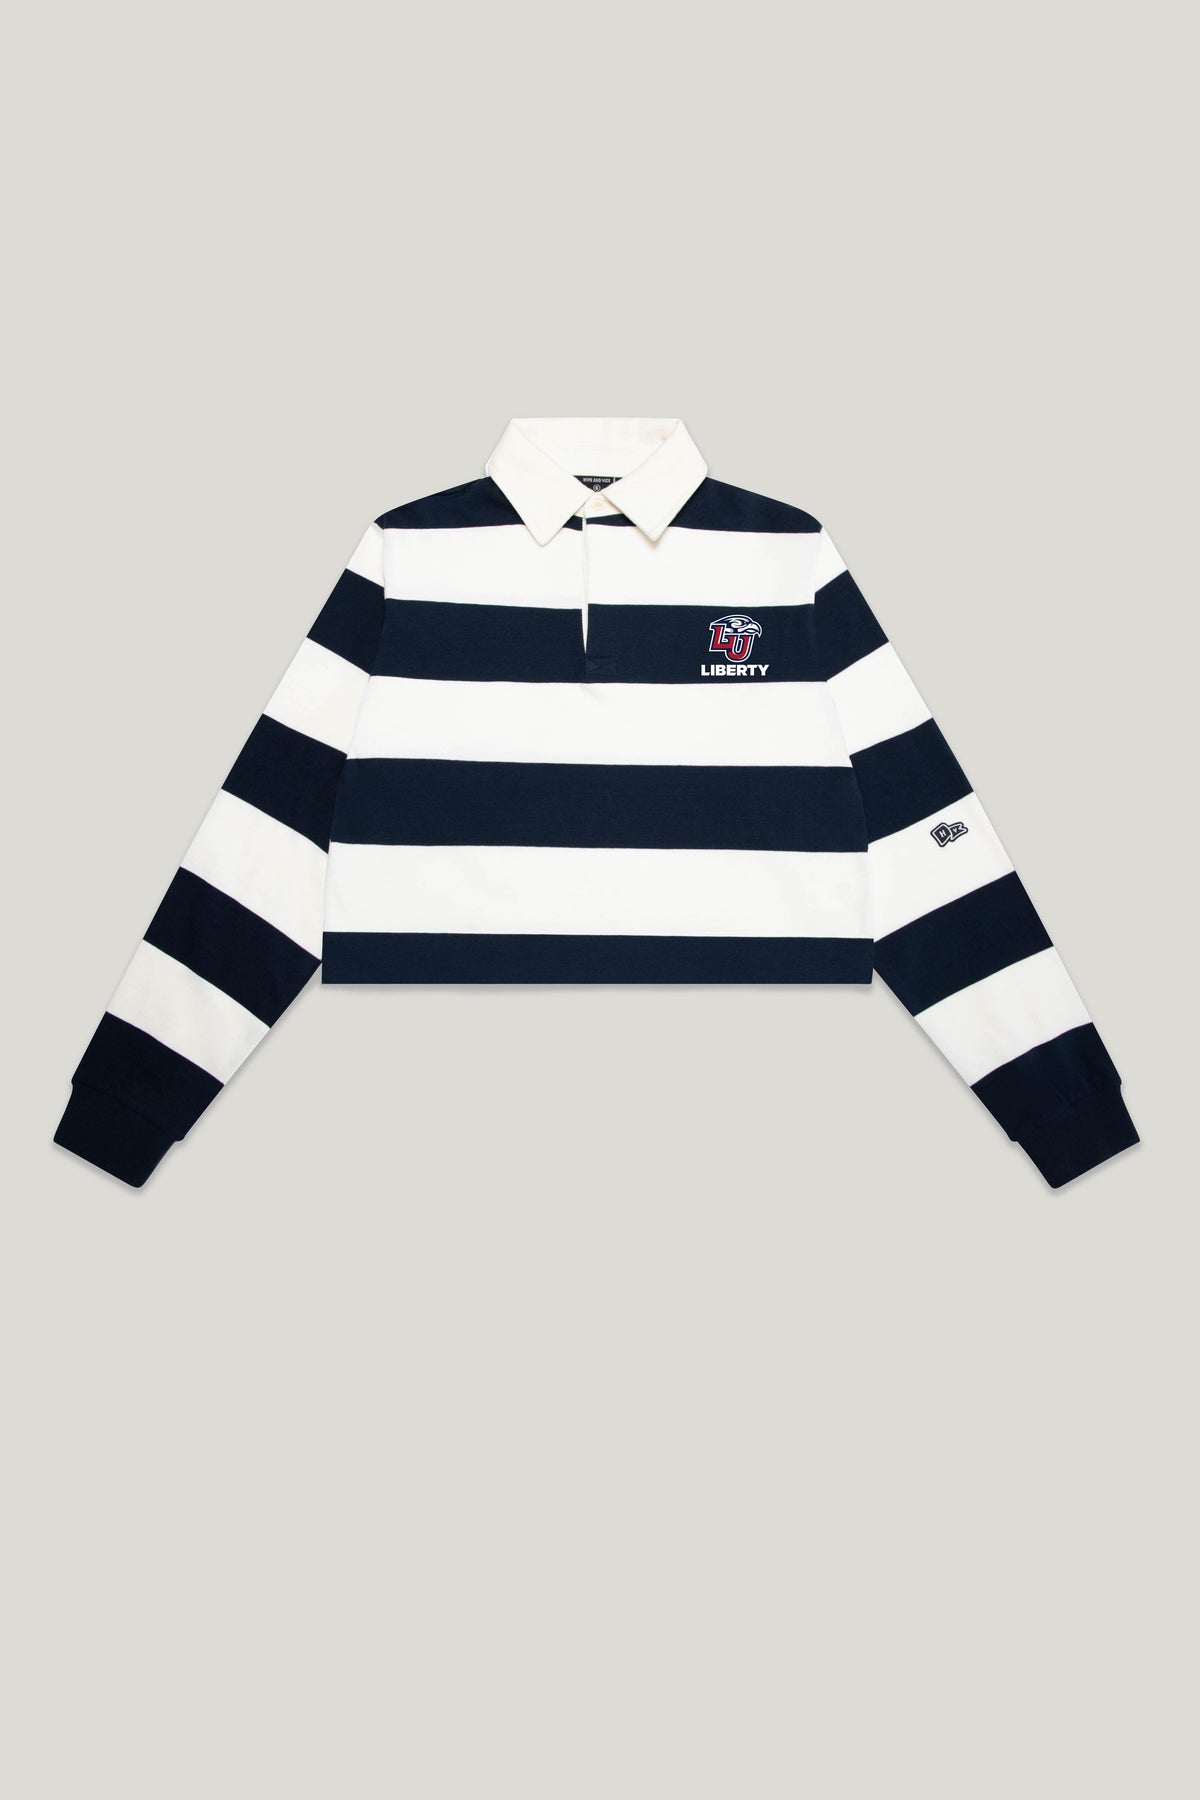 Liberty University Rugby Top